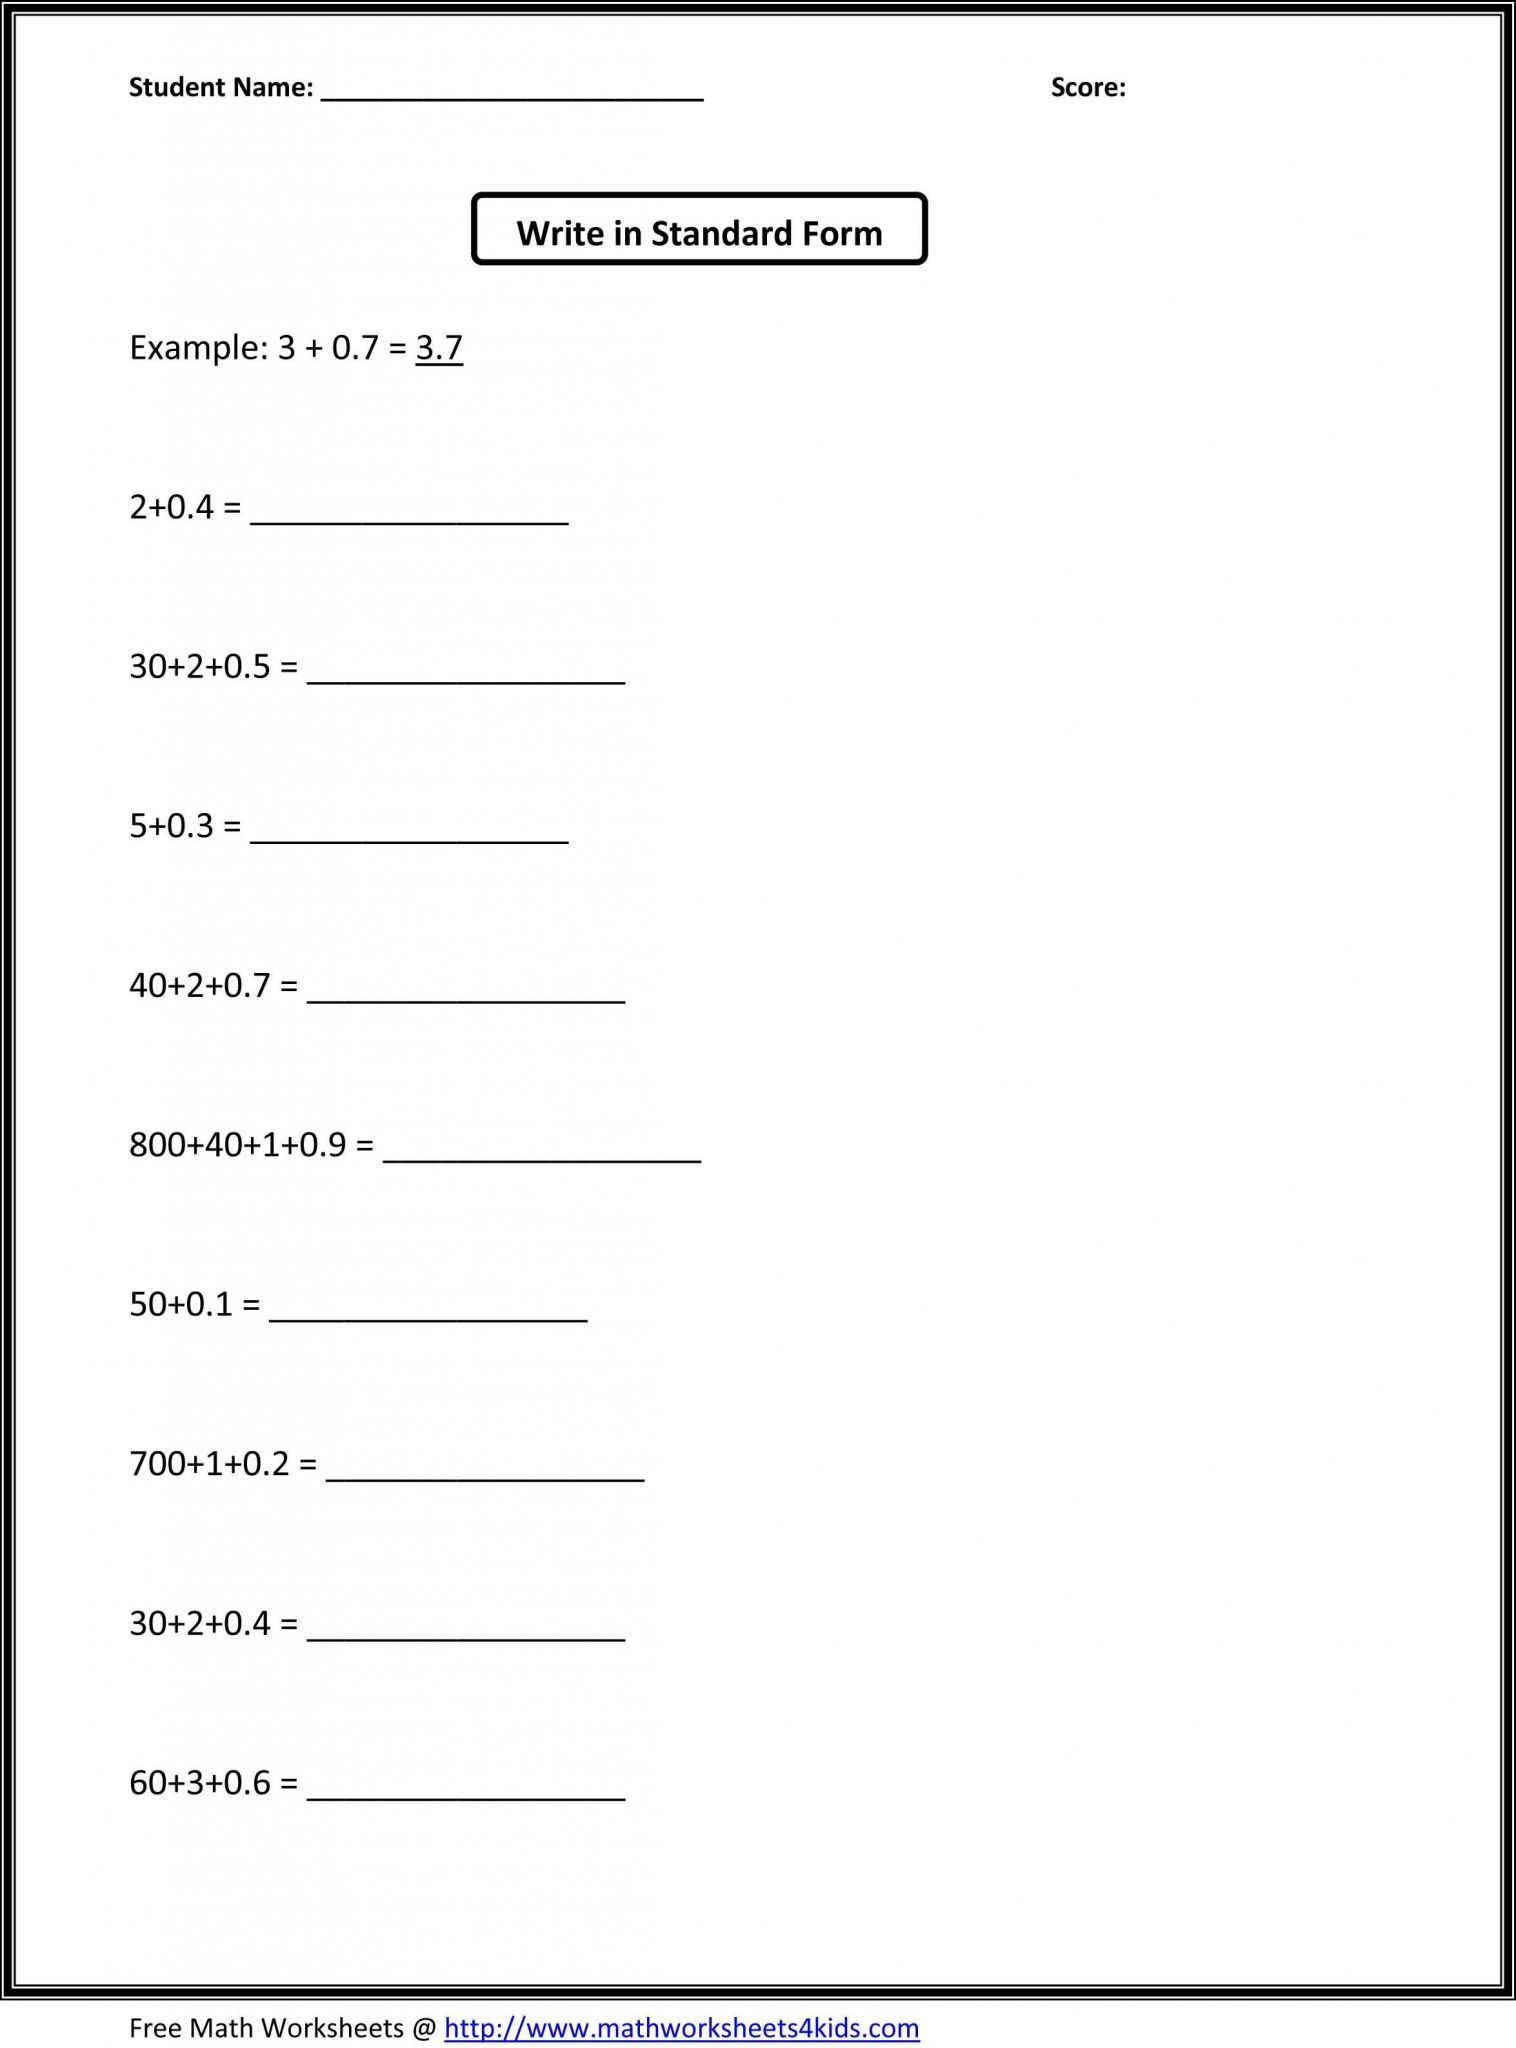 Compound Inequalities Worksheet Answers together with Graphing Inequalities Worksheet Number Line Inspirationa Standard